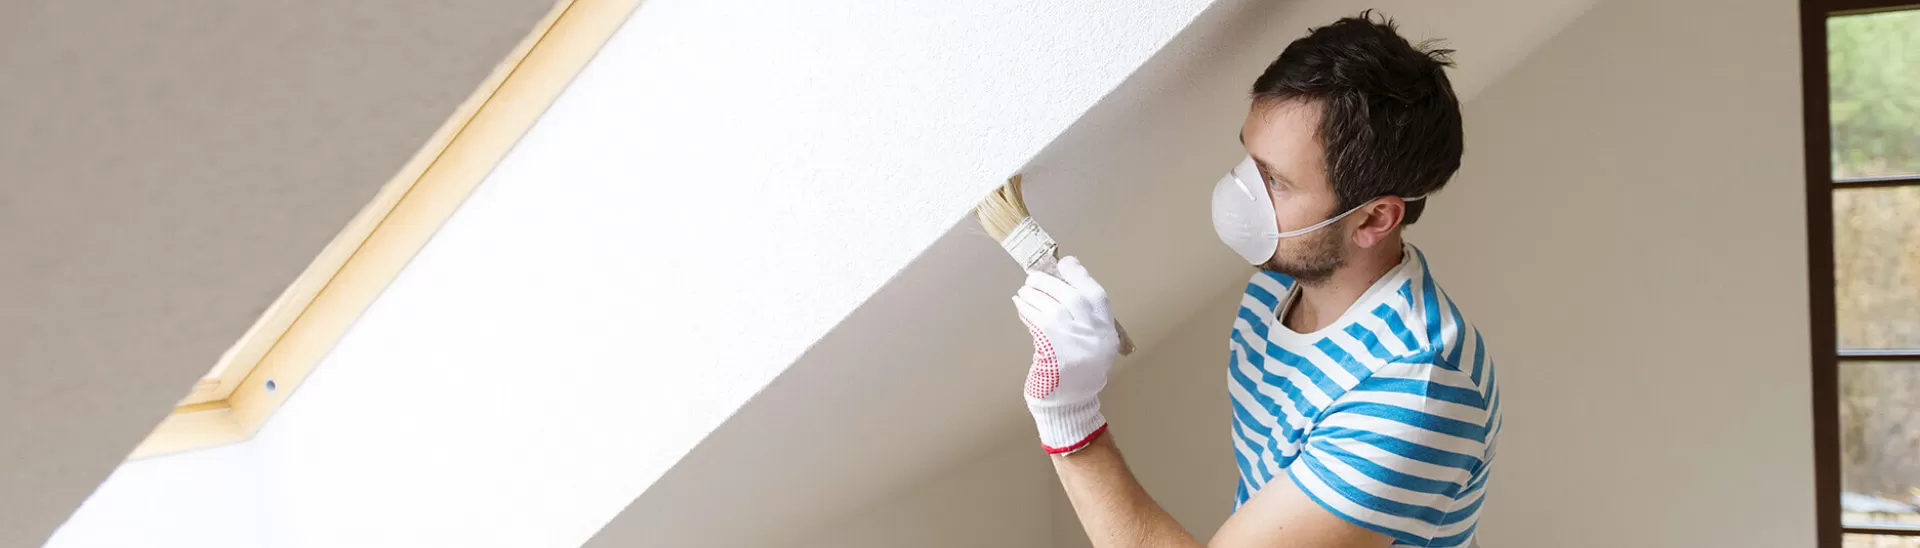 Colouring your home? Consider these tips for a safe house painting experience